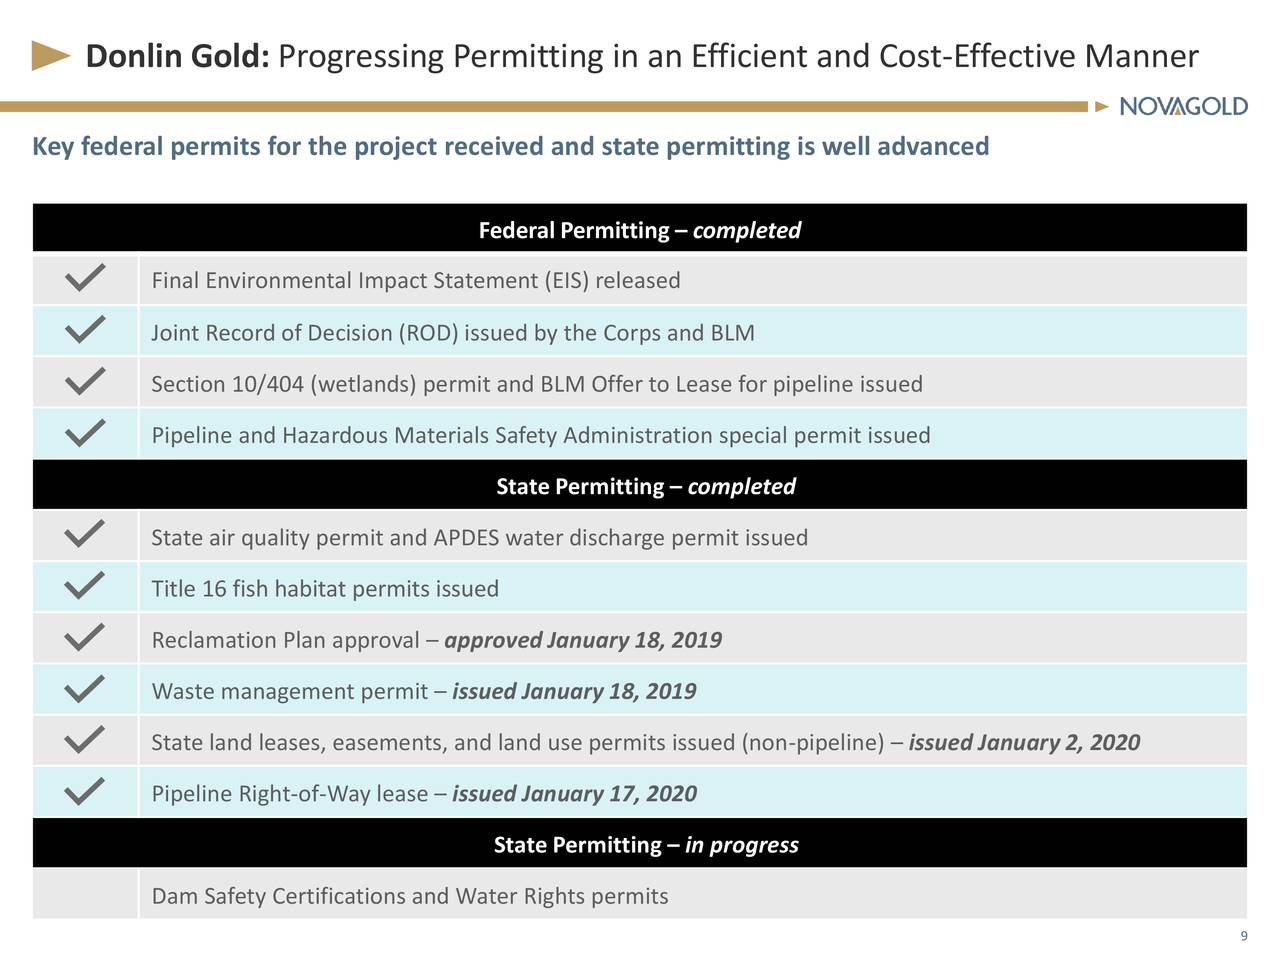 Donlin Gold: Progressing Permitting in an Efficient and Cost-Effective Manner